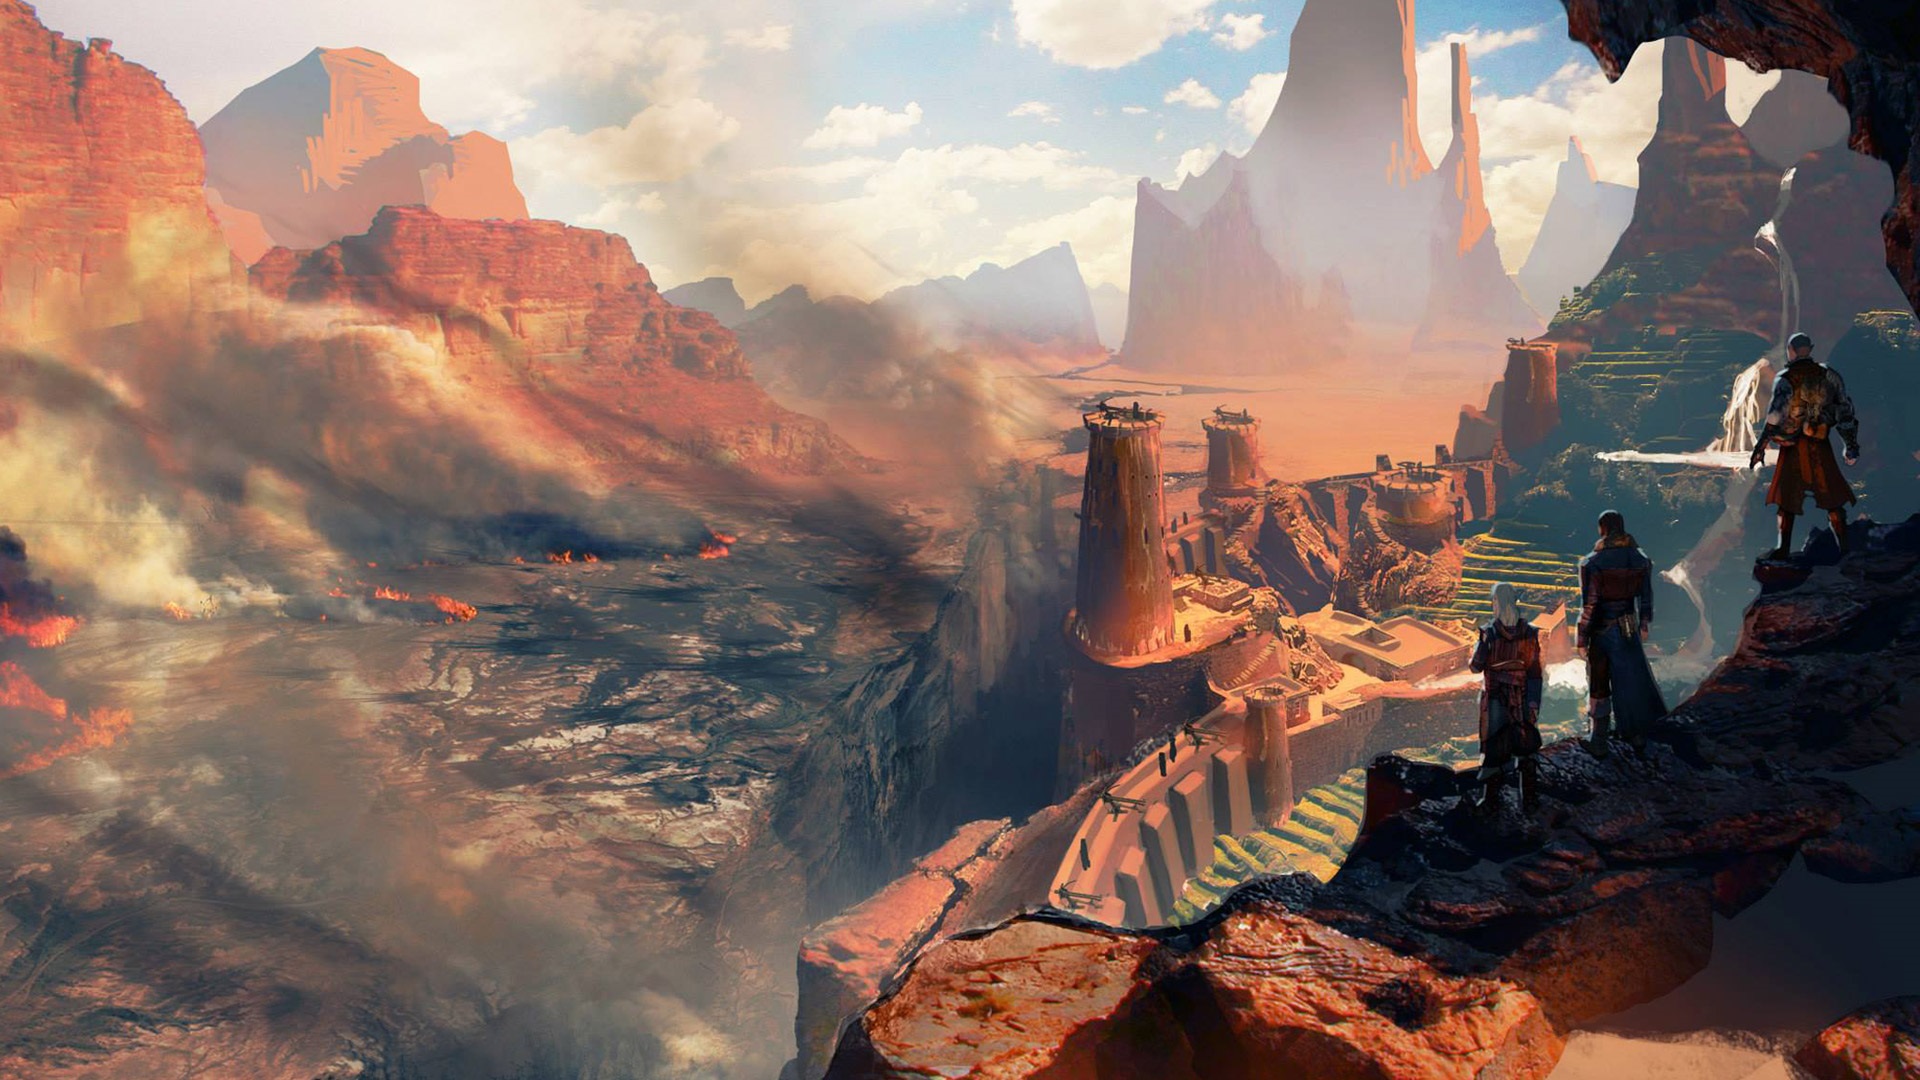 Dragon Age Inquisition Wallpaper - Dragon Age Inquisition Mountains - HD Wallpaper 